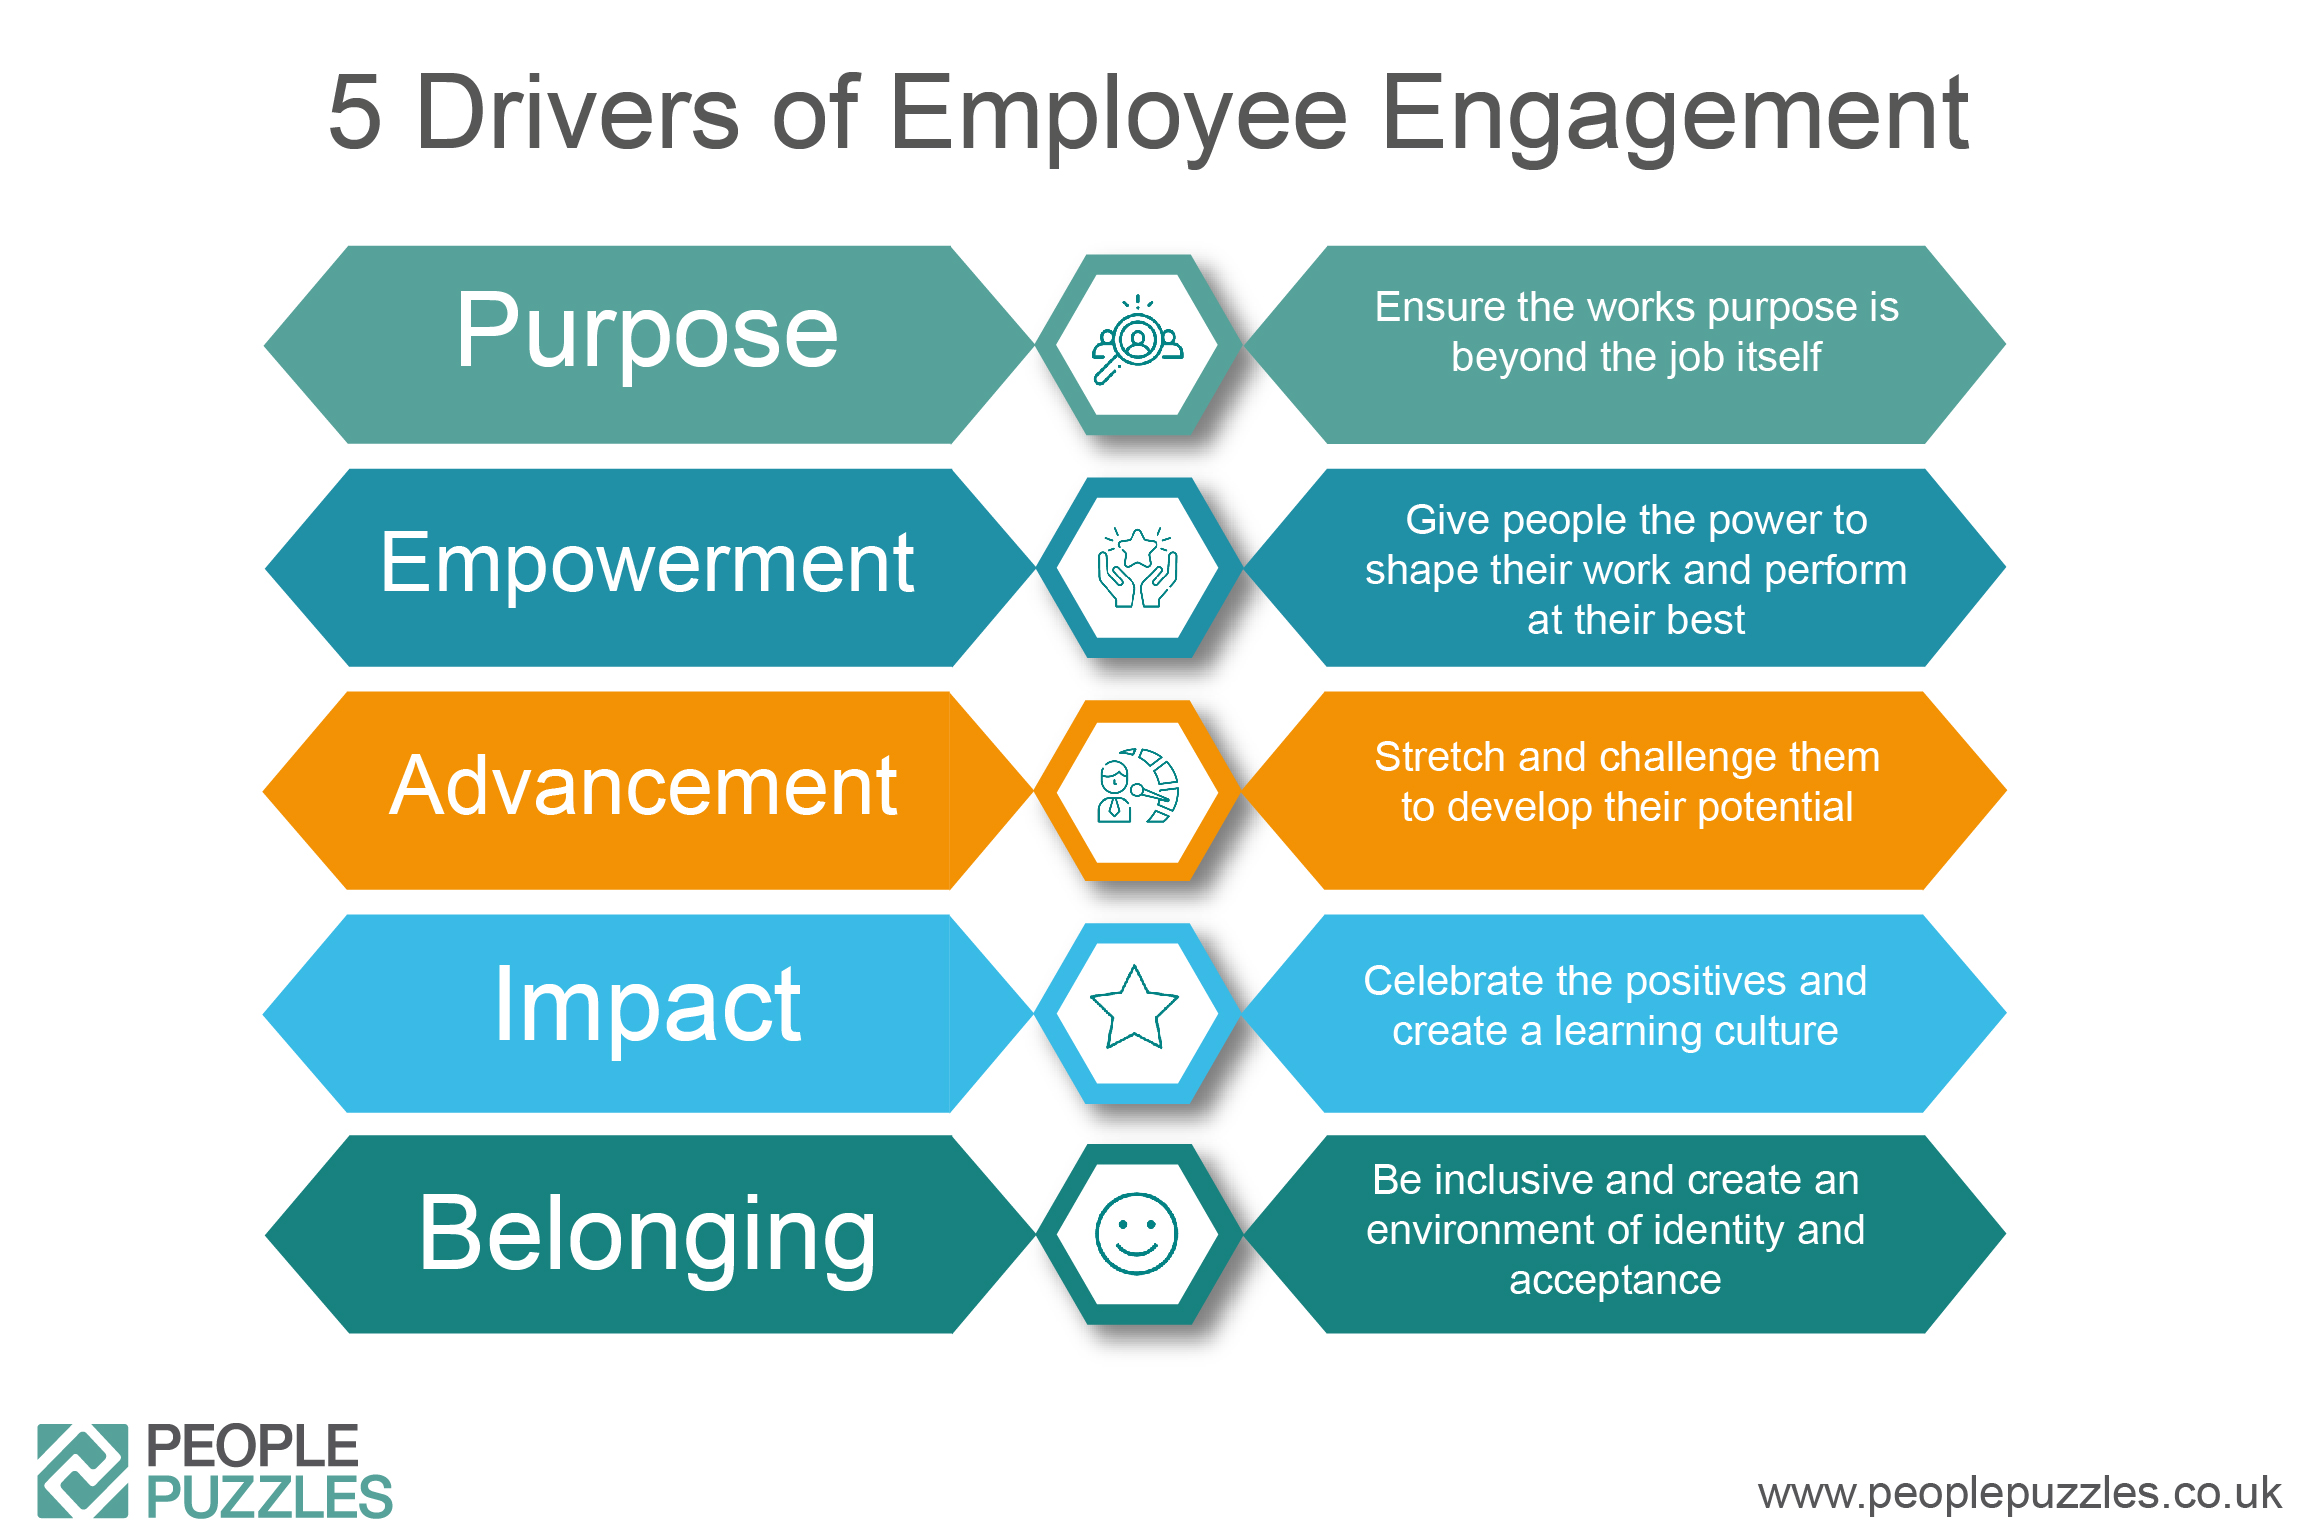 22 Employee Engagement Games & Activities To Make